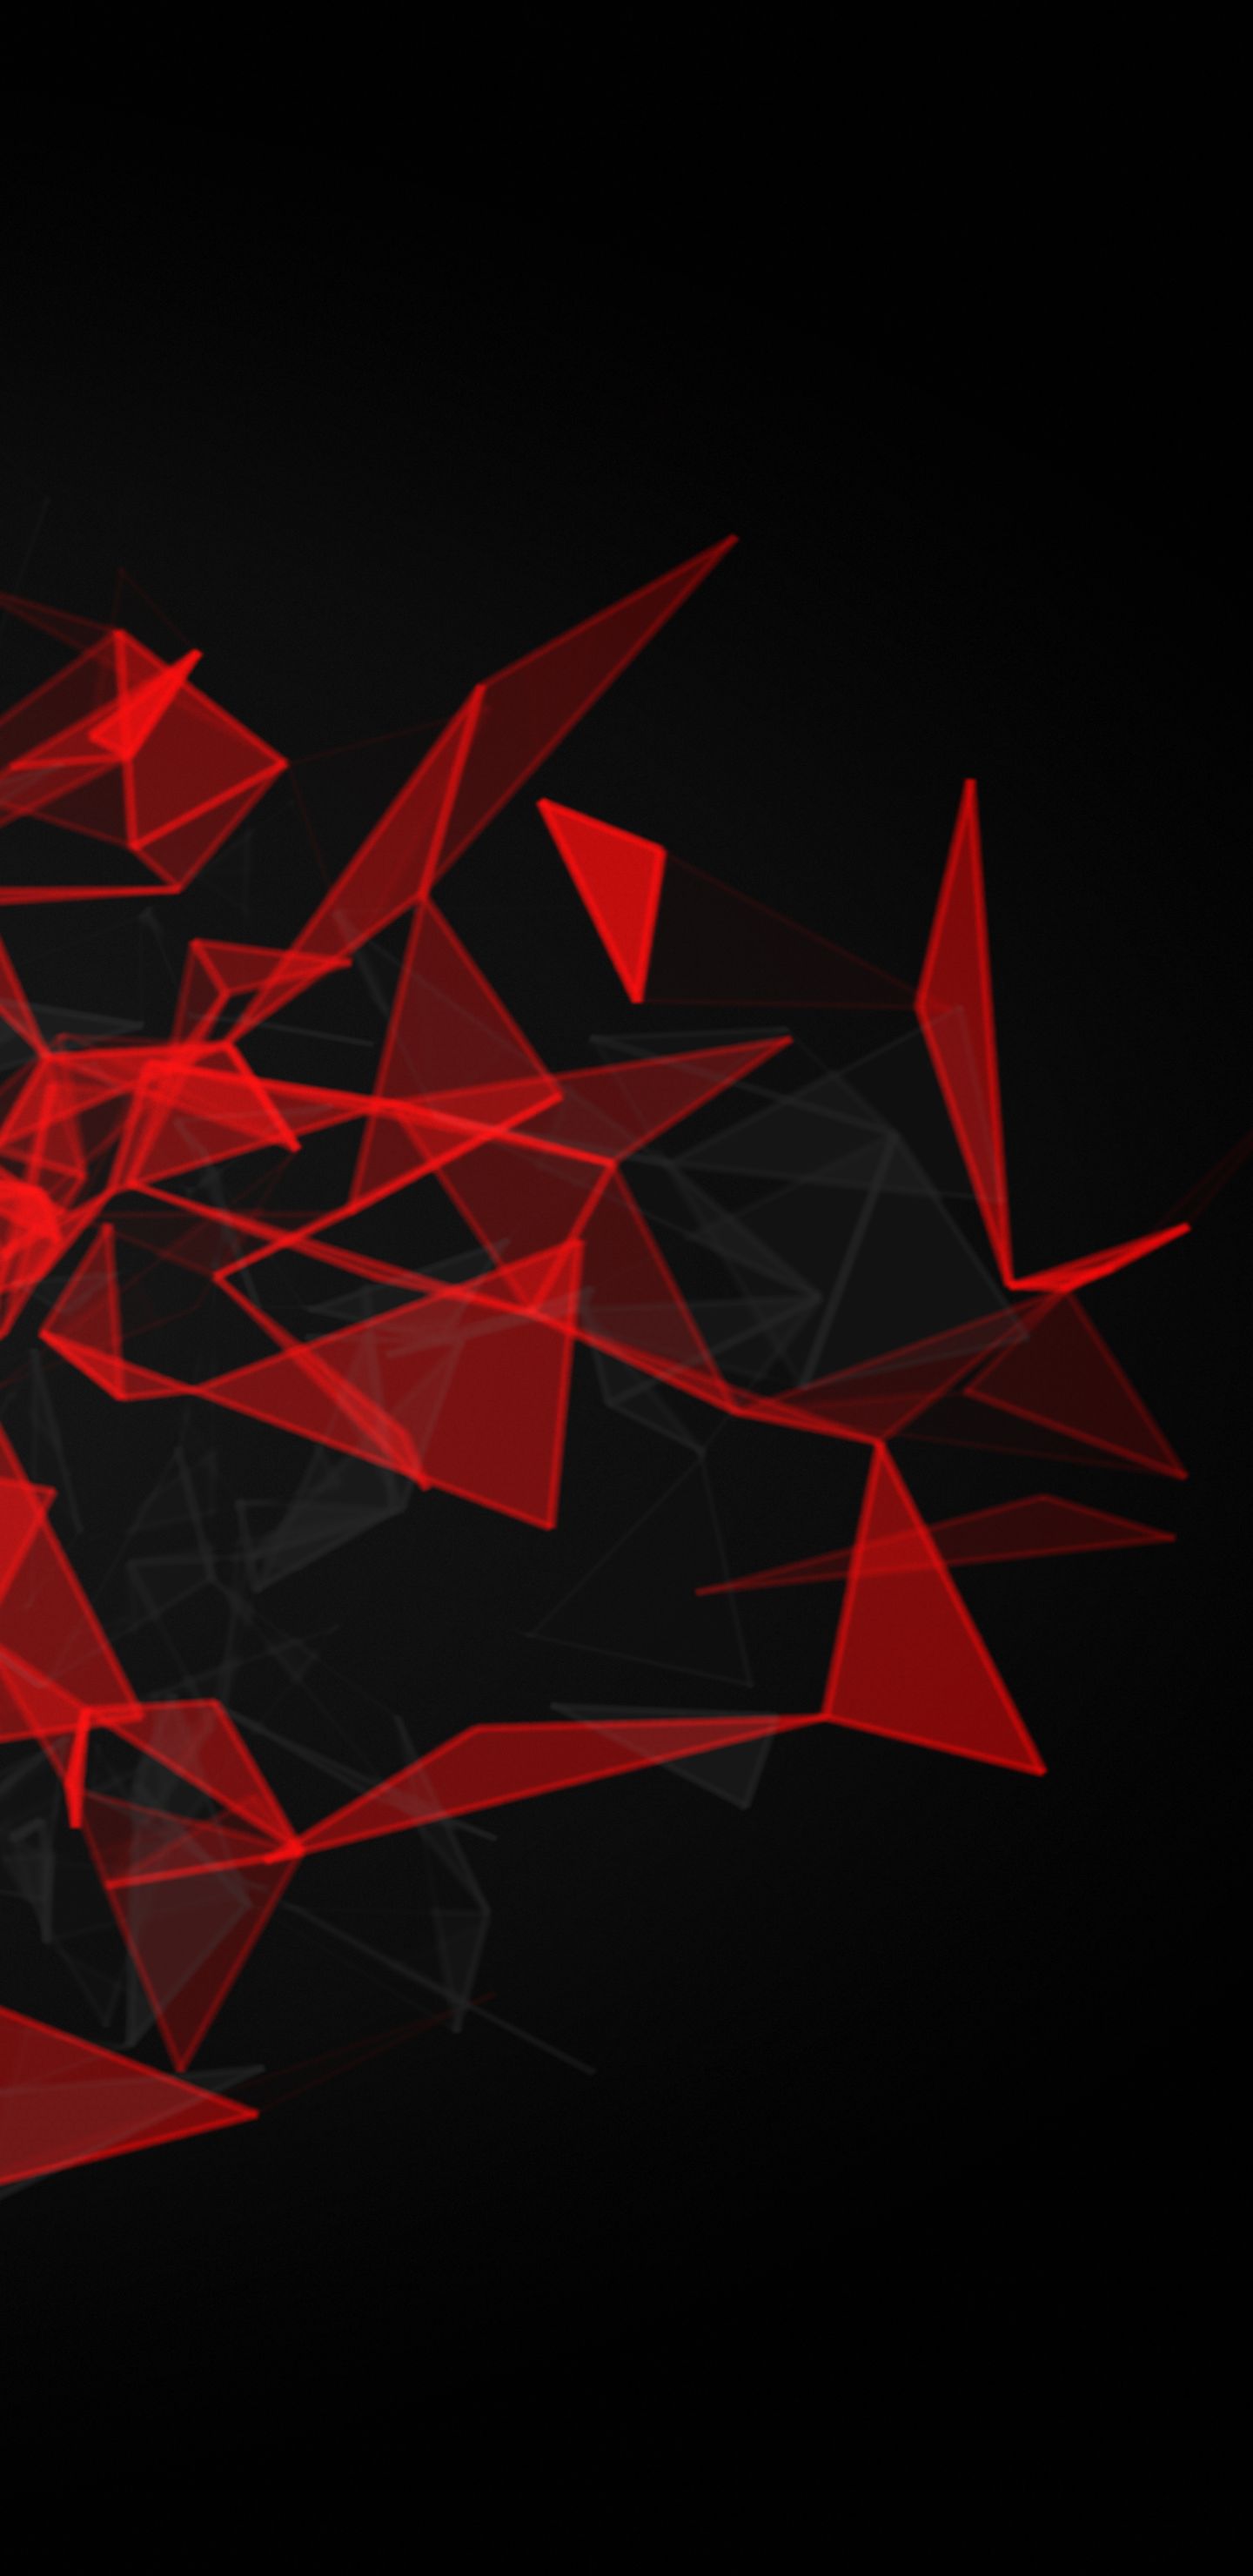 red, black, abstract, polygon